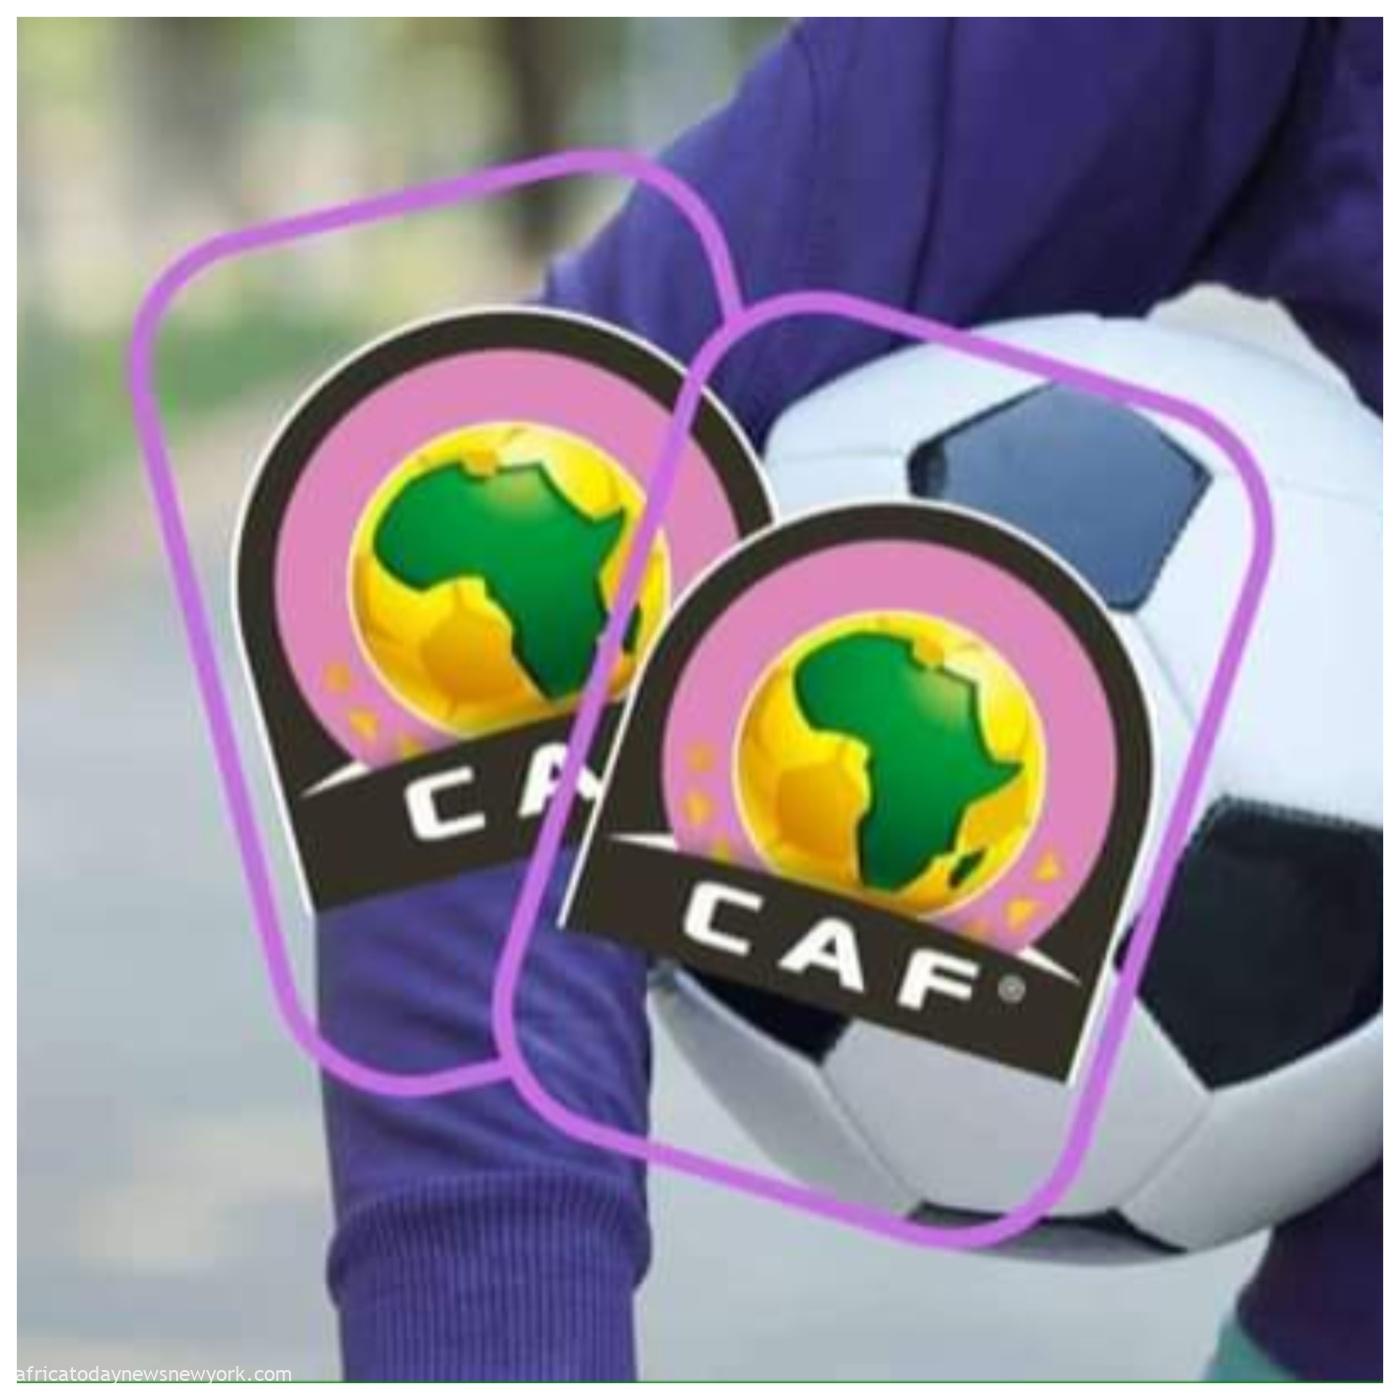 Nigerian Football Clubs To Receive CAF’s $50,000 Largesse